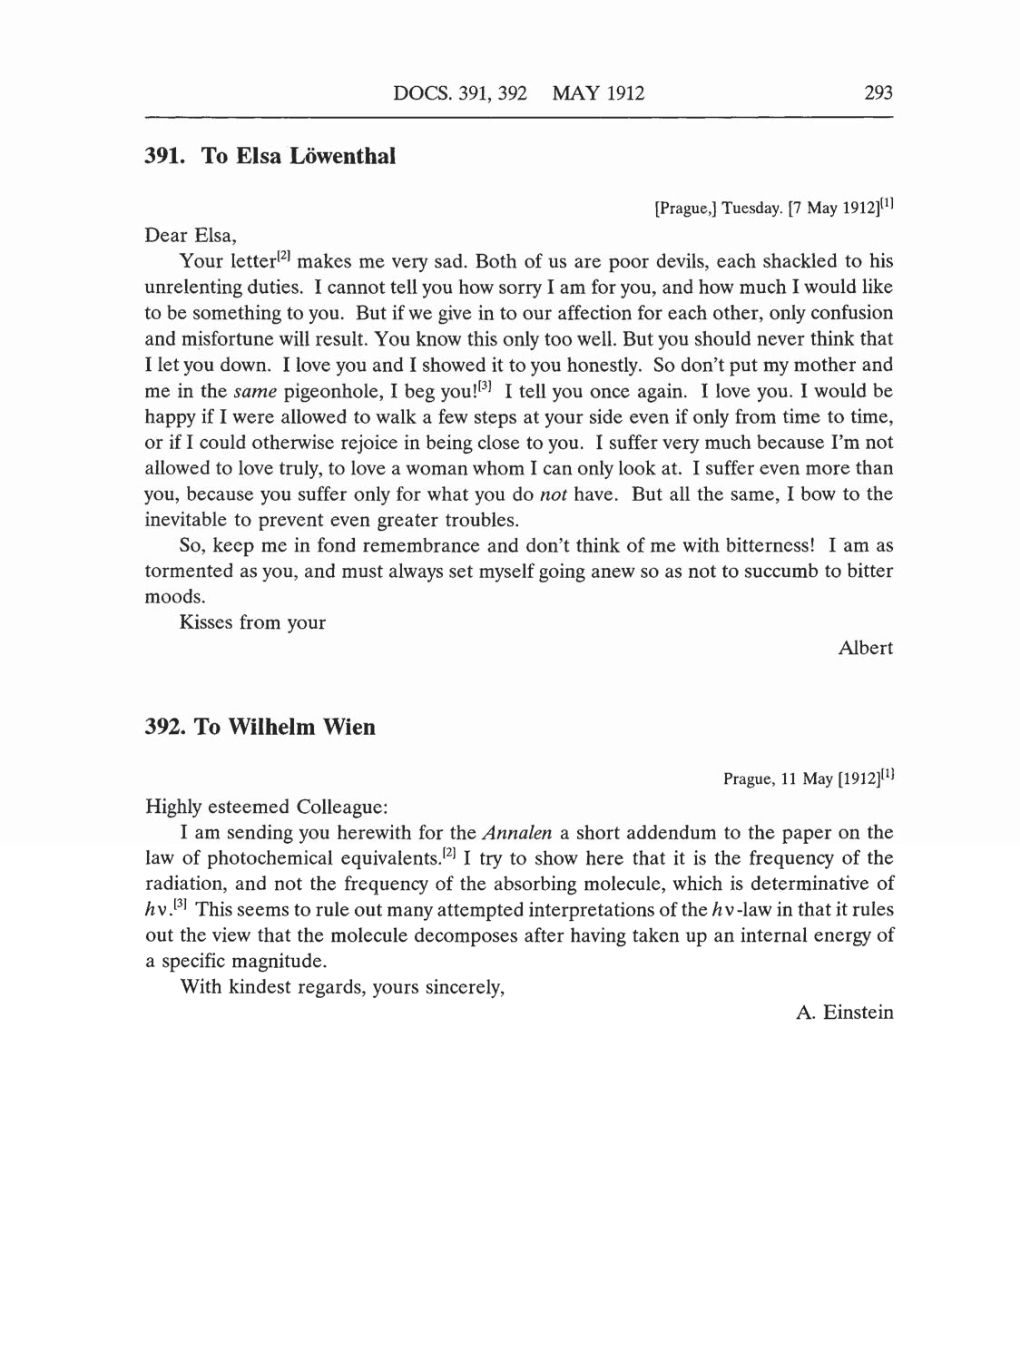 Volume 5: The Swiss Years: Correspondence, 1902-1914 (English translation supplement) page 293